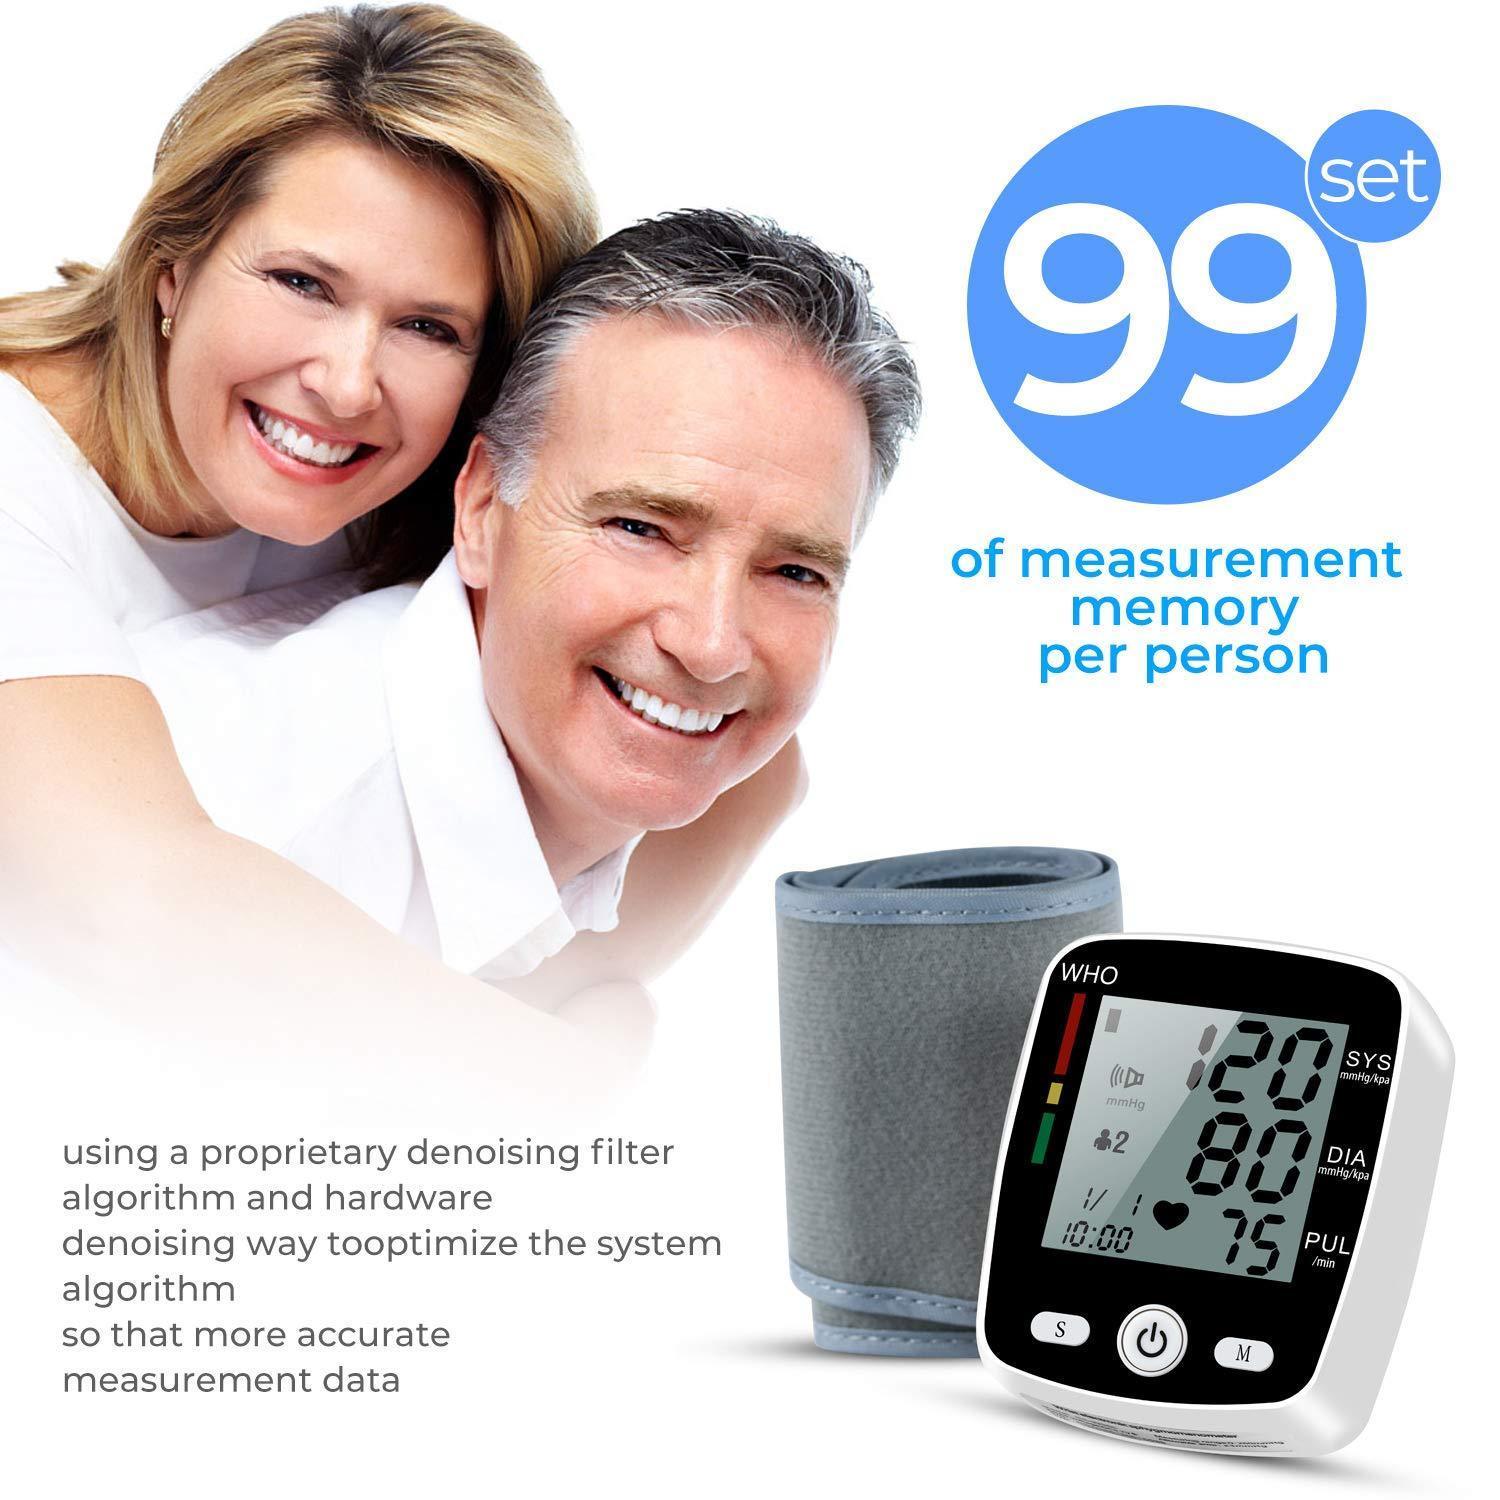 Wrist Blood Pressure Monitor Cuff with LCD Display